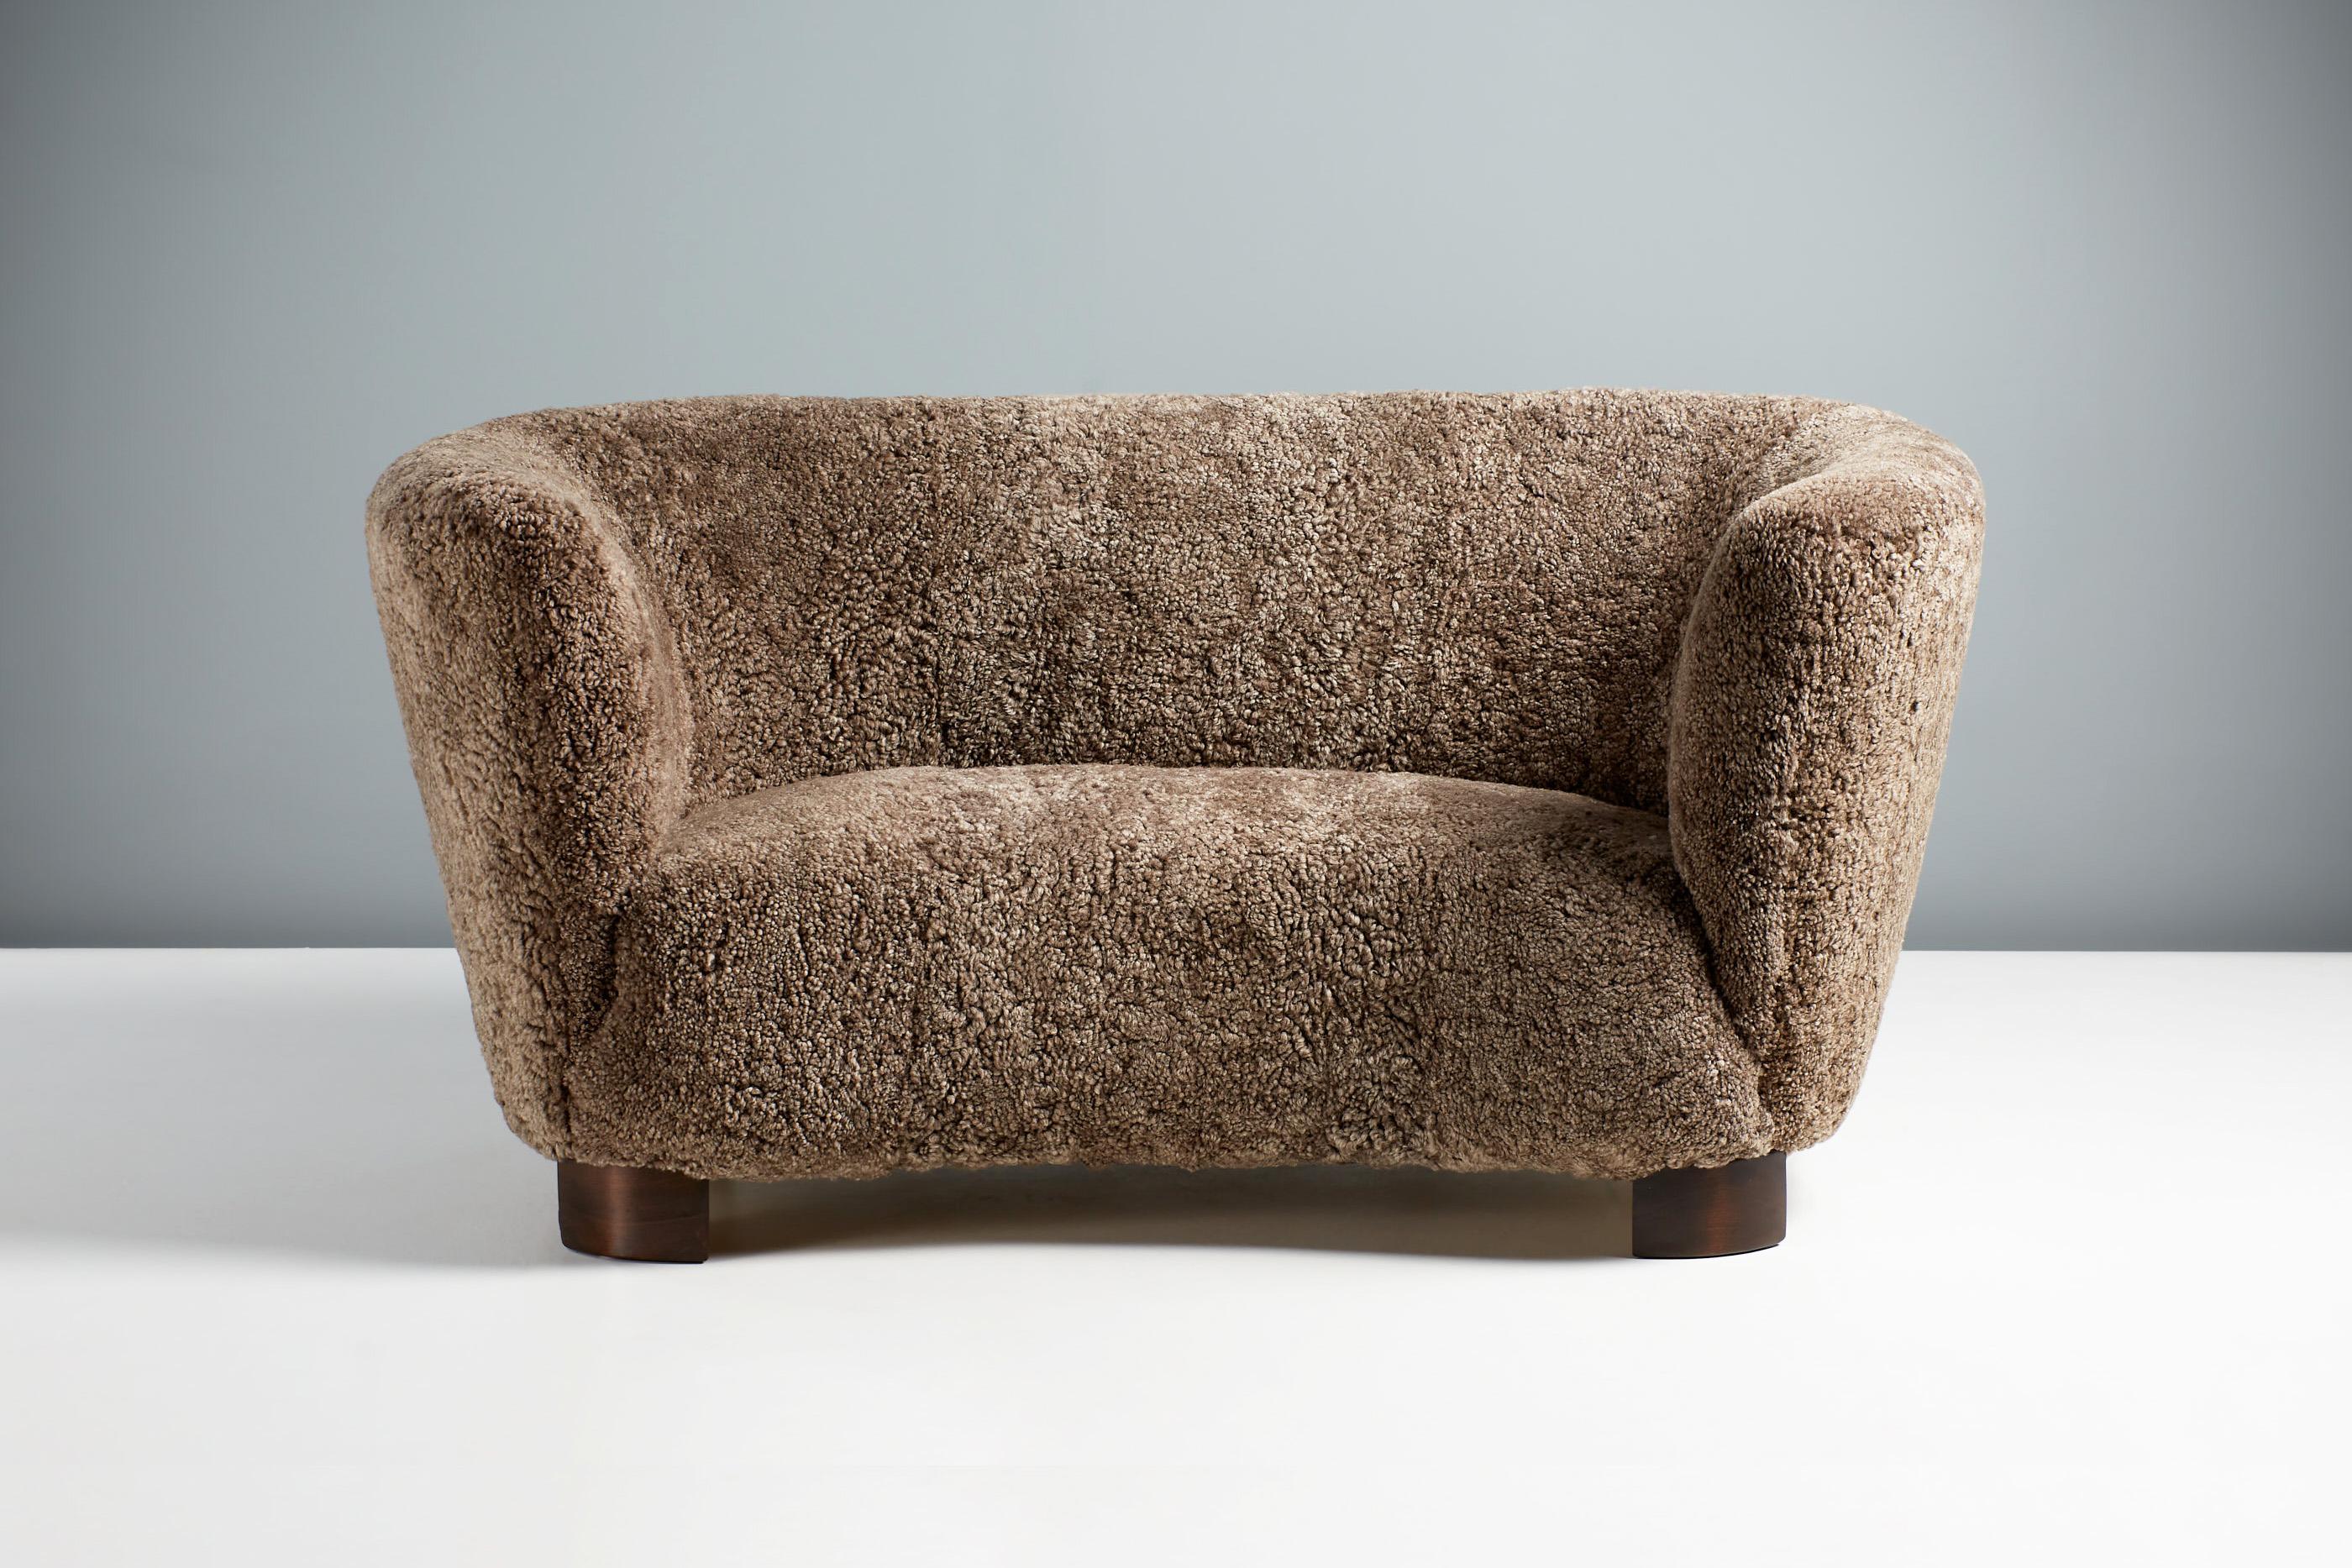 Danish Cabinetmaker Love Seat Sofa, c1950s

Love seat sofa designed and made in Denmark in the 1940s. This example has been reupholstered in luxurious Australian brown sheepskin from Skandilock, Sweden at our workshops in London. The legs are